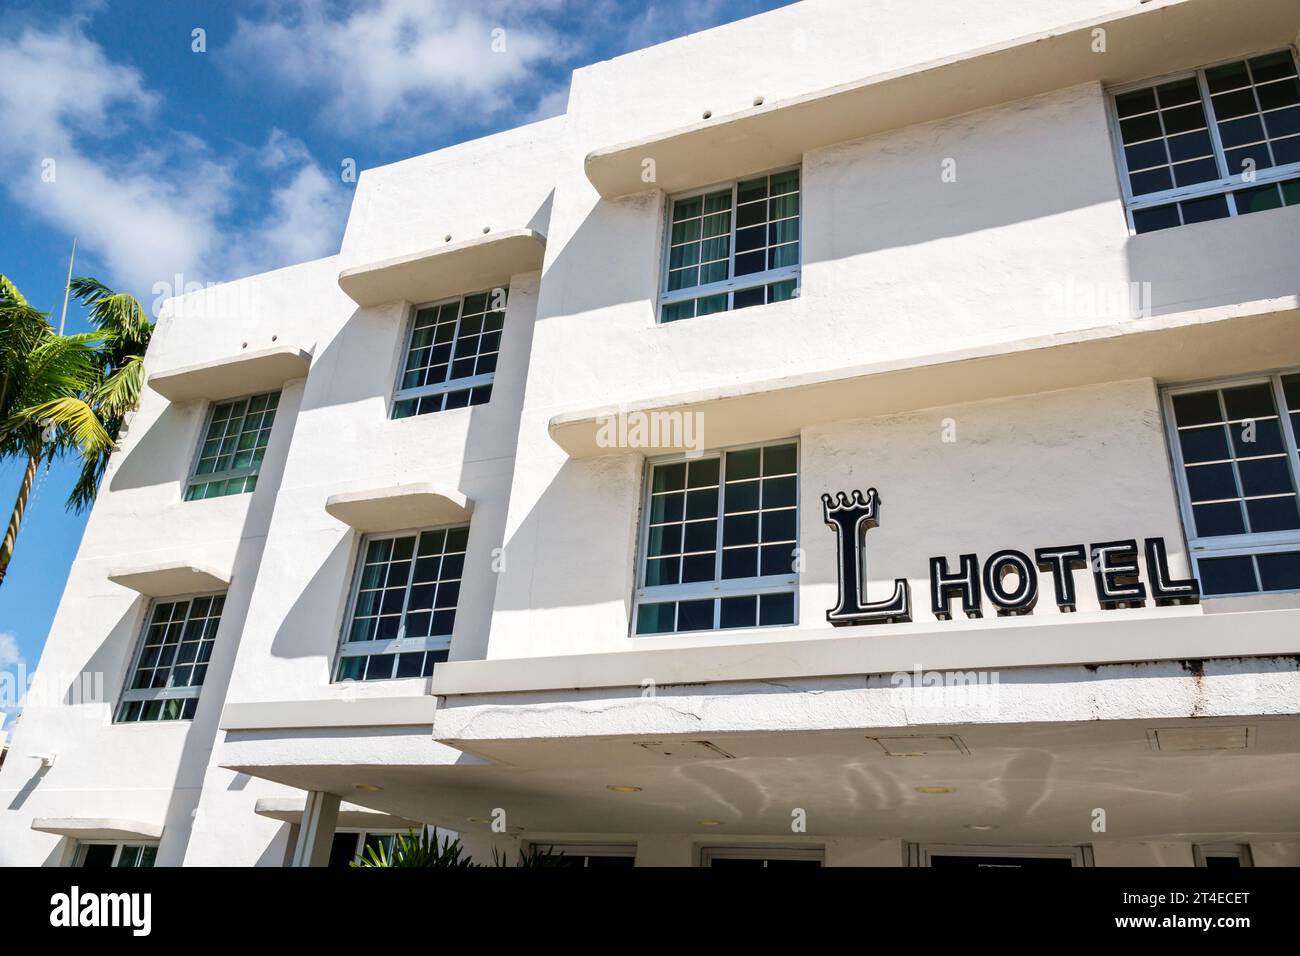 Miami Beach Florida,outside exterior,building front entrance hotel,L Hotel Miami Beach sign,hotels motels businesses Stock Photo